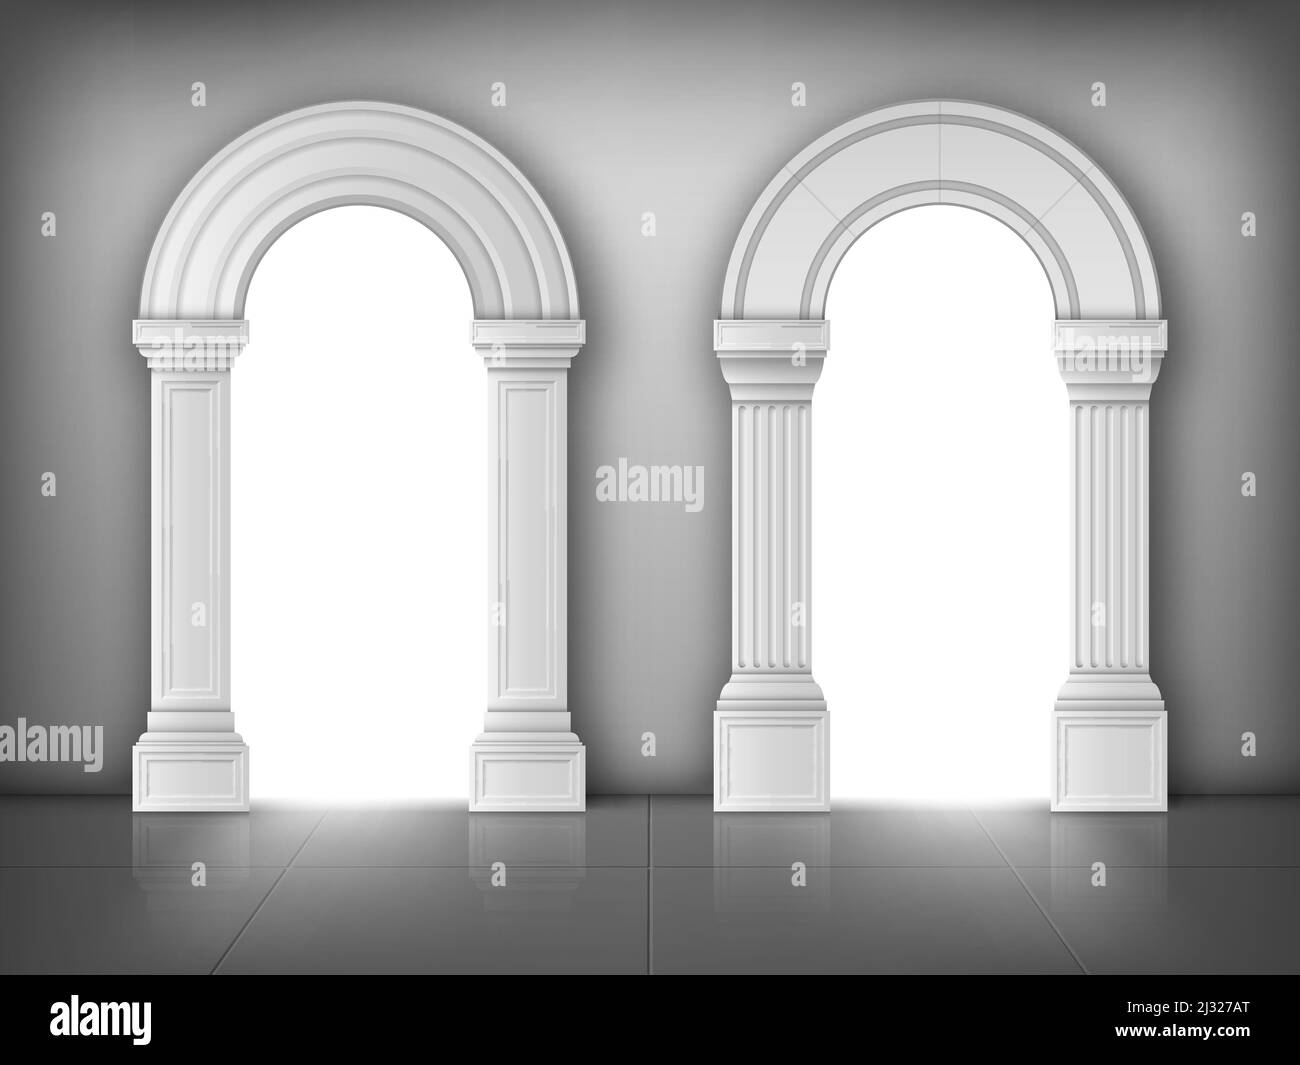 Arches with columns in wall, interior gates with white pillars in palace or castle, archway frames, portal entrance, antique doorway with sun light go Stock Vector